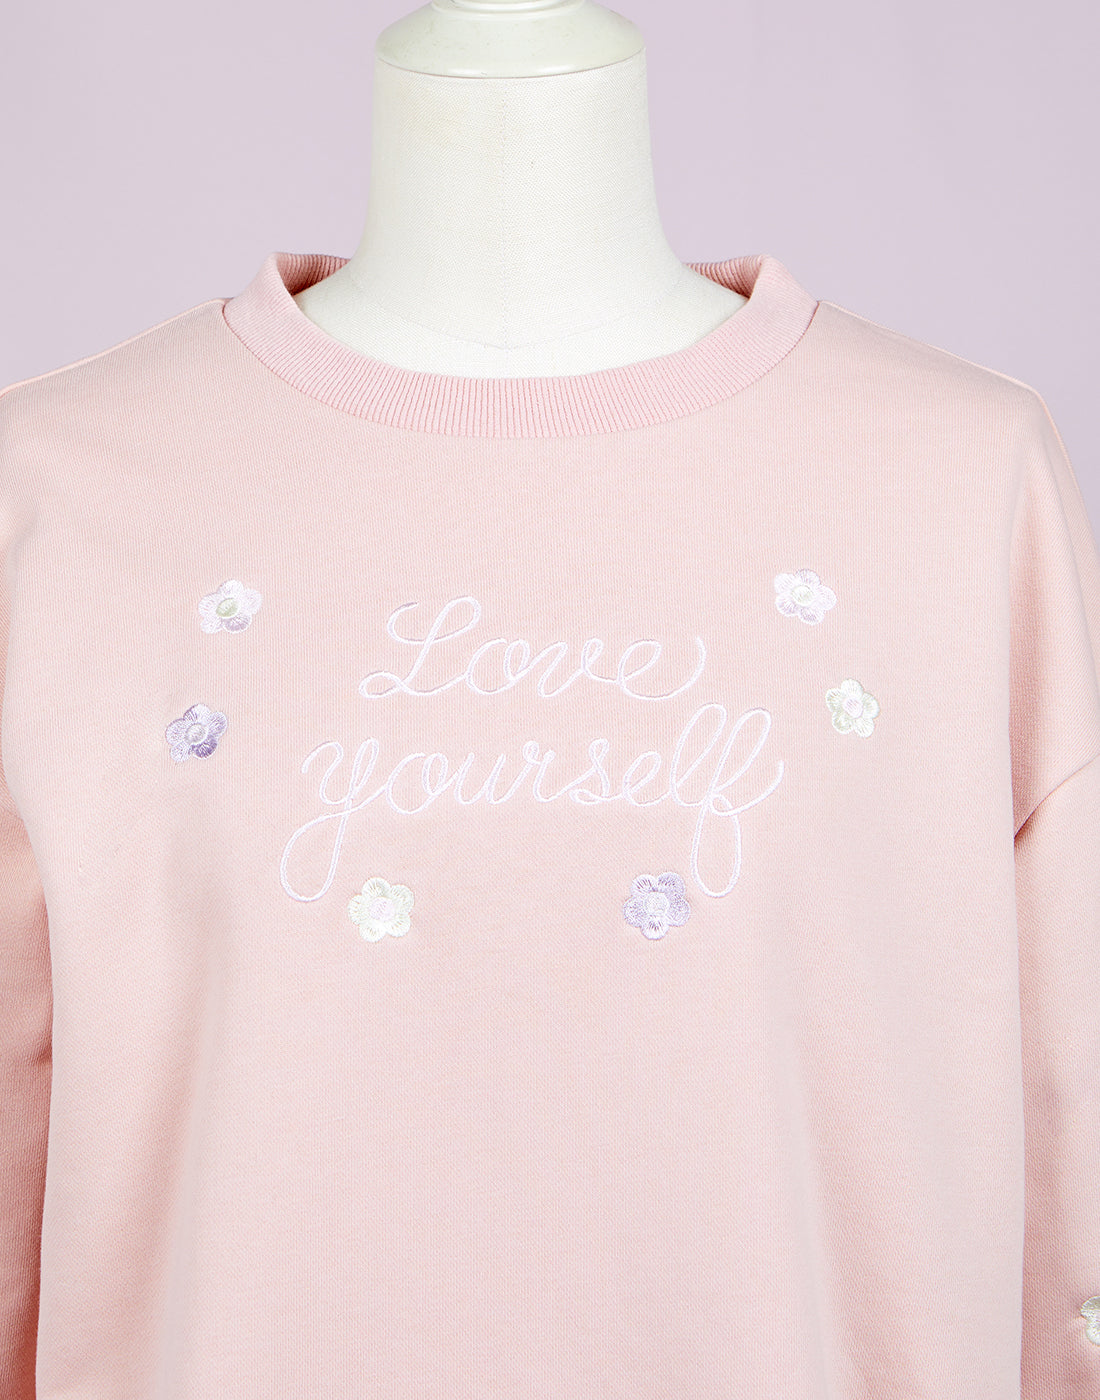 Loveyourself floral トップス